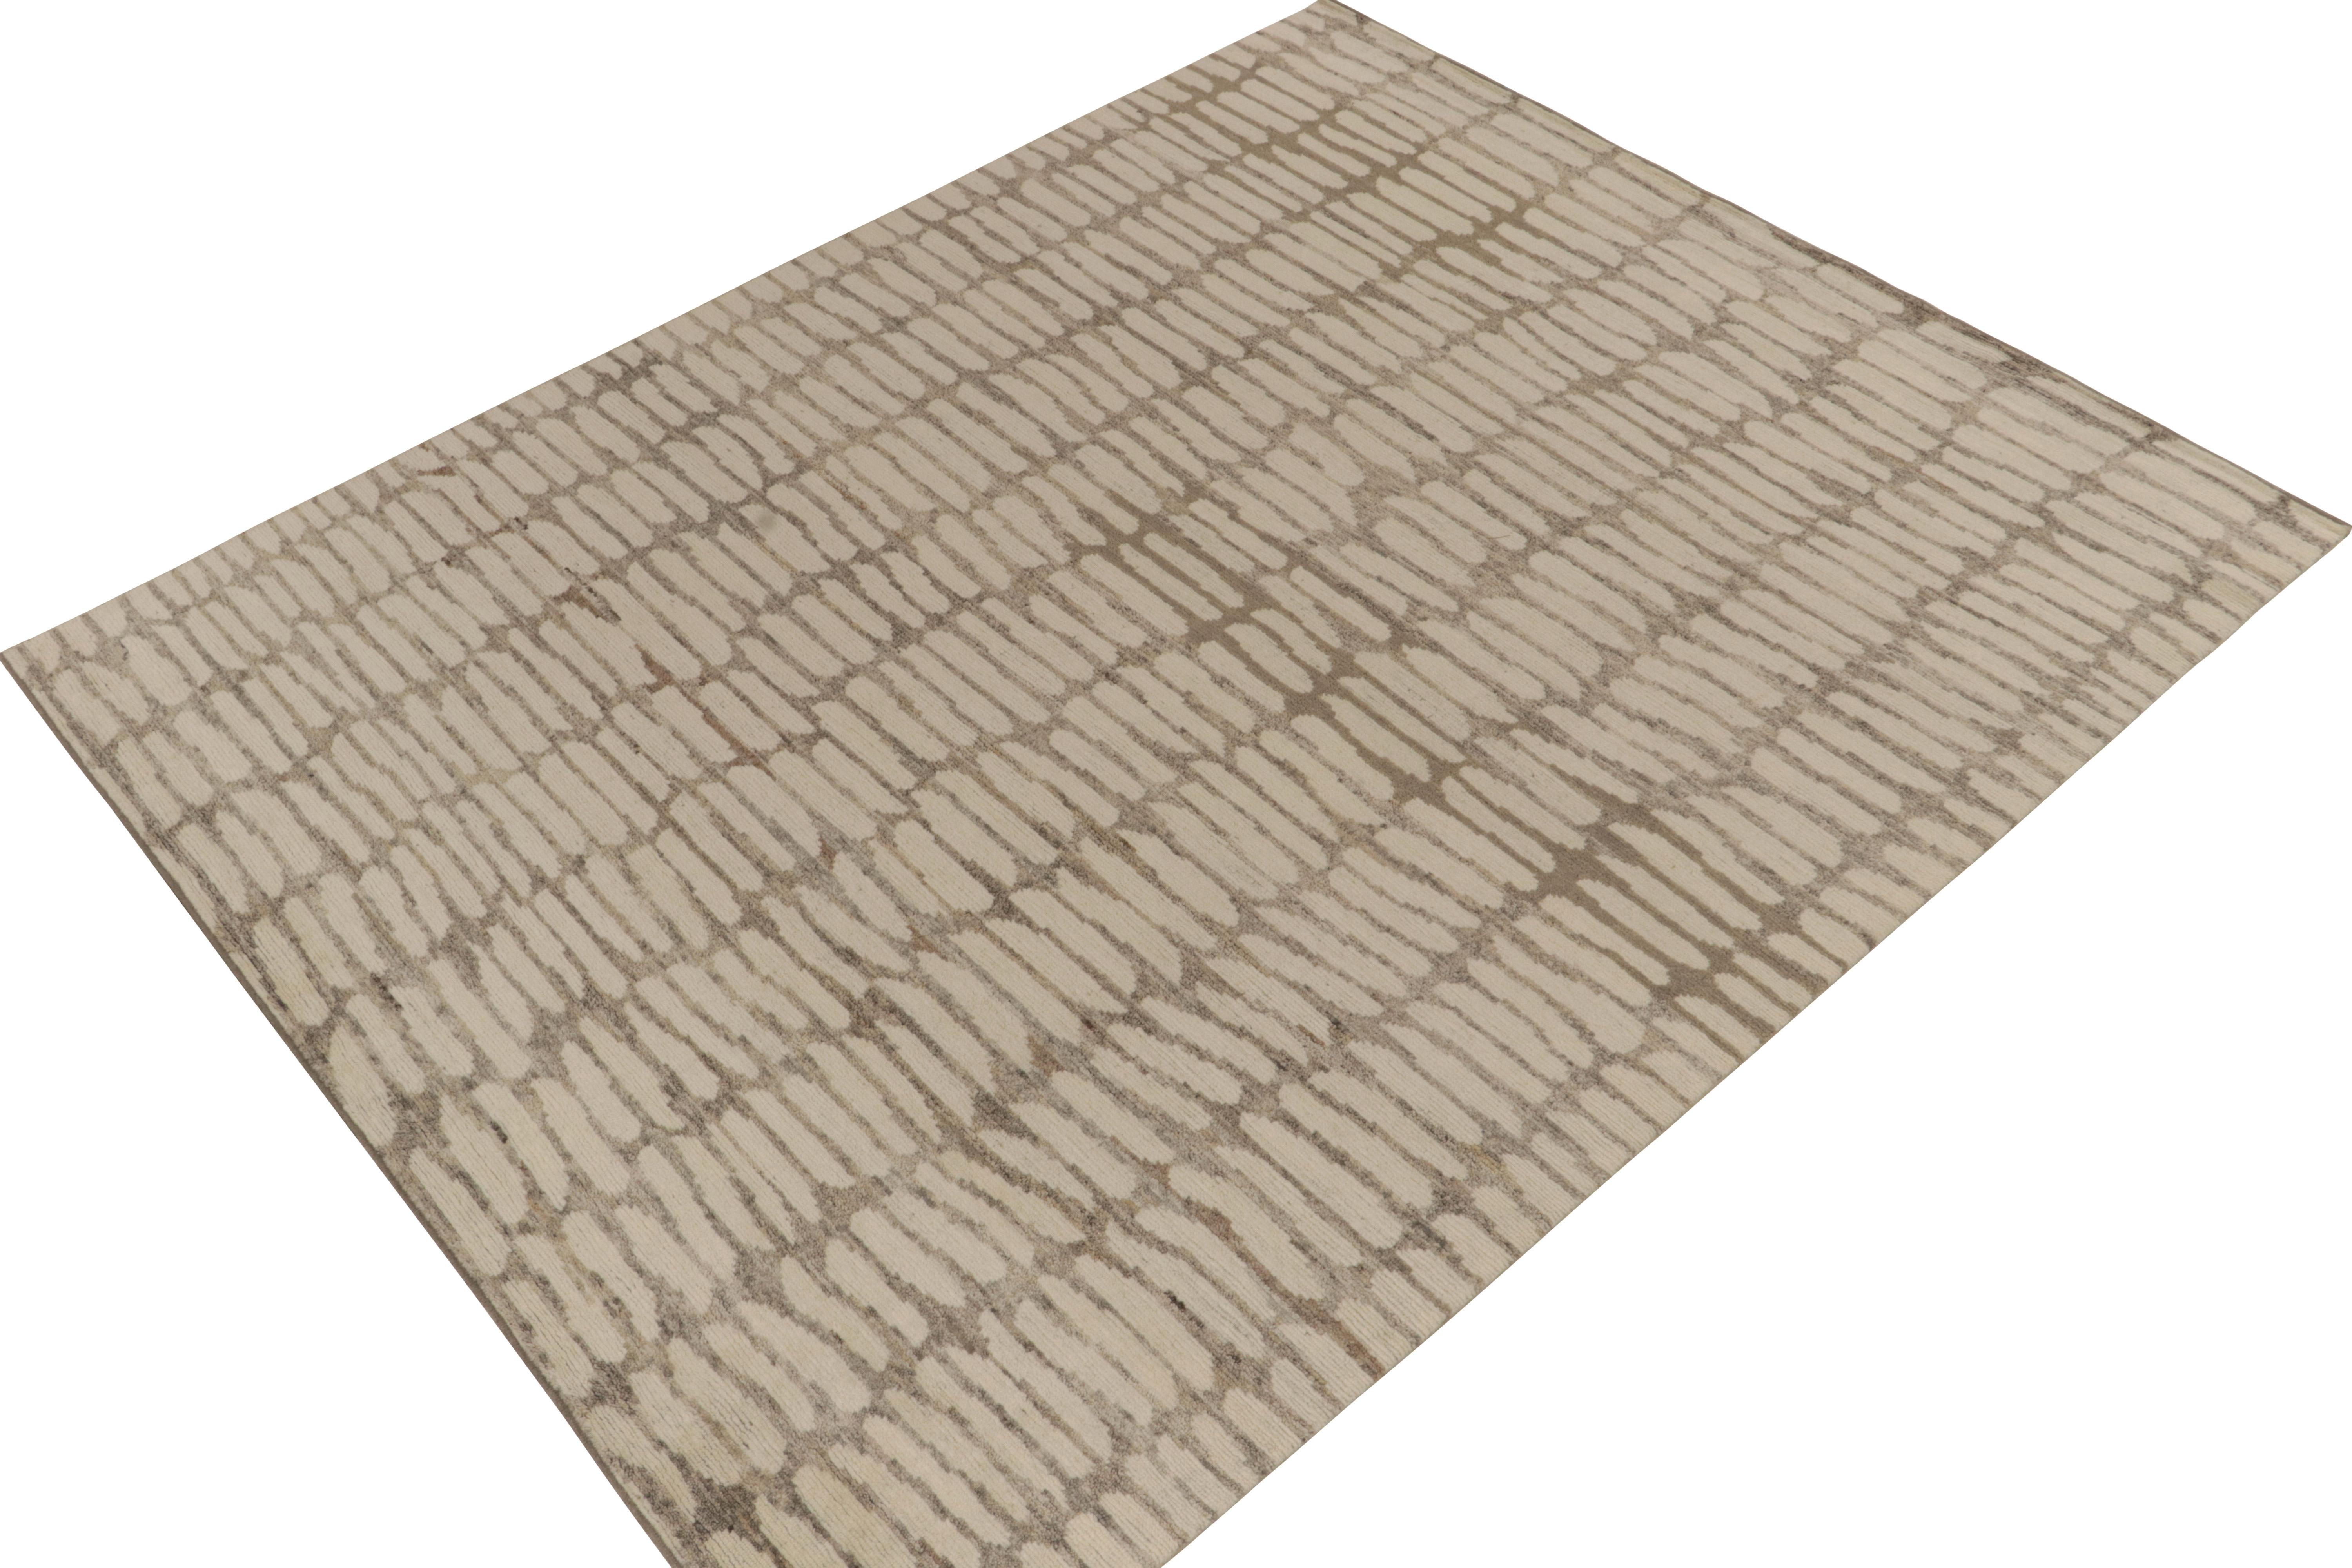 From Rug & Kilim’s bold New & Modern selections, an 8x10 rug hand-knotted in all wool. 

On the Design: The piece is a subtle nod to abstract aesthetics with sensible layering of white oval patterns atop gray with beige notes. Keen eyes will admire